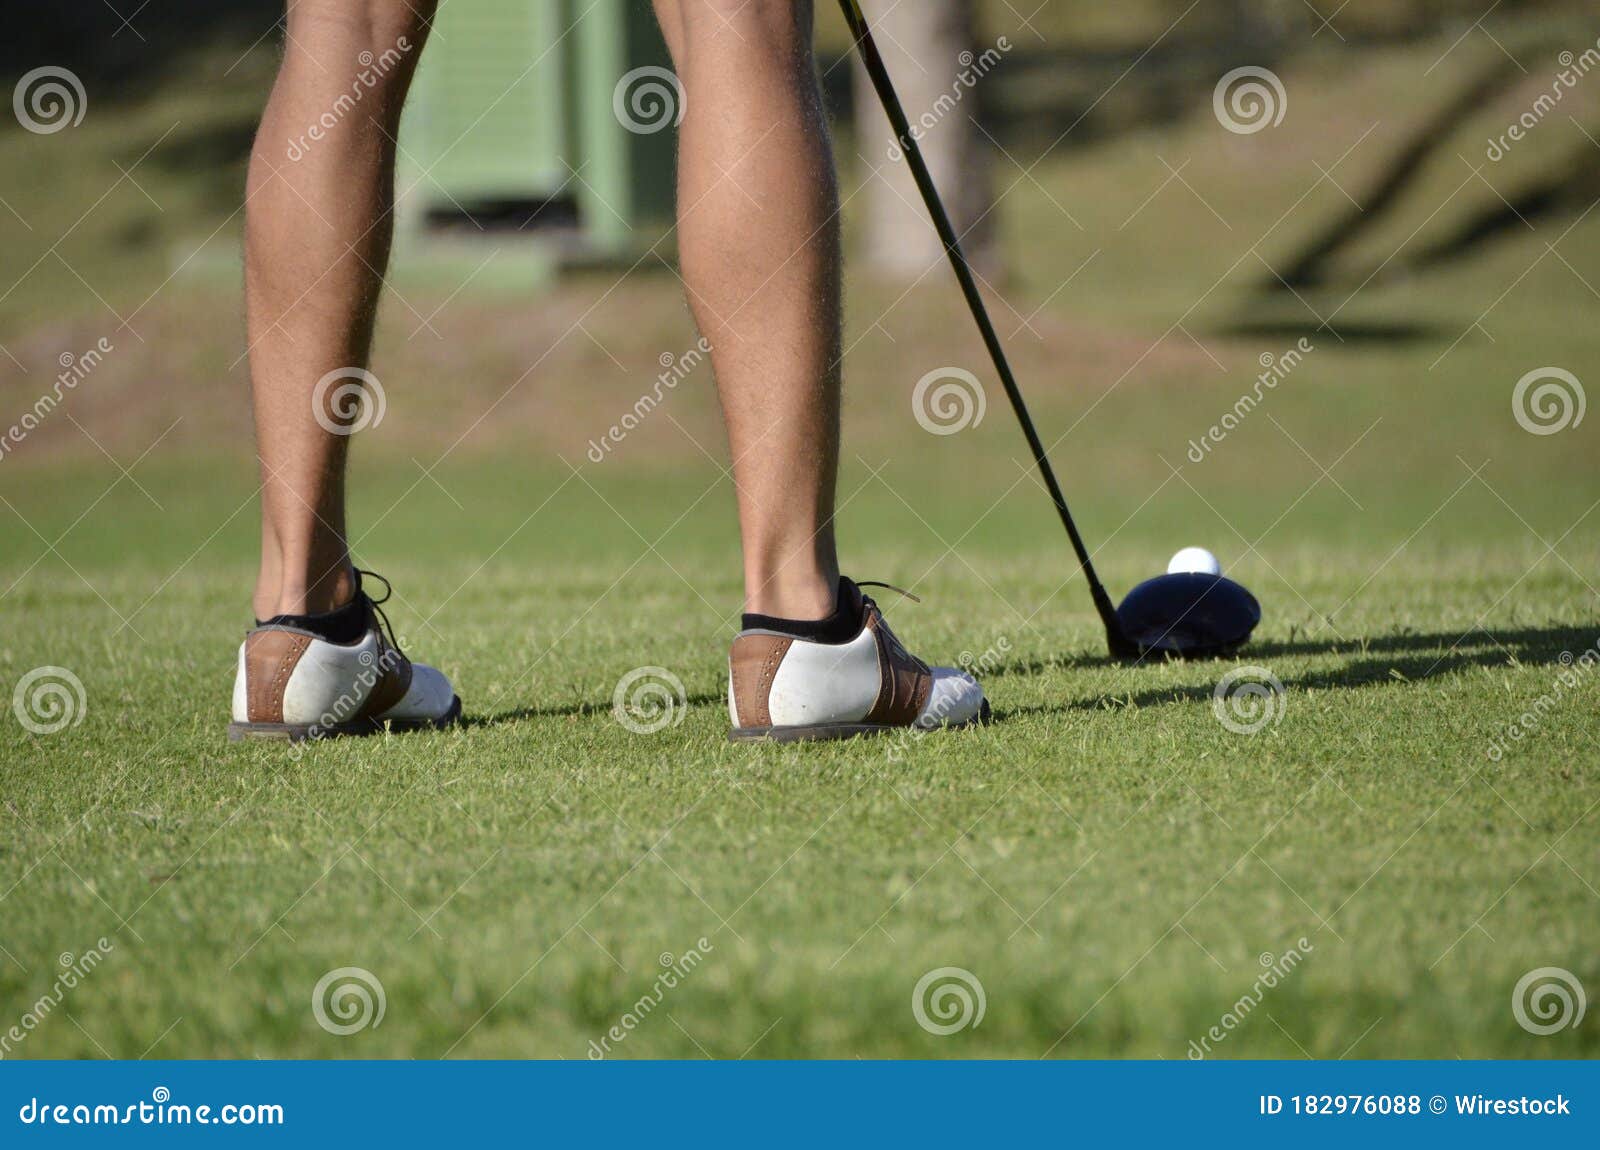 Selective Focus Shot of a Golfer S Feet with a Golf Club and Ball Under